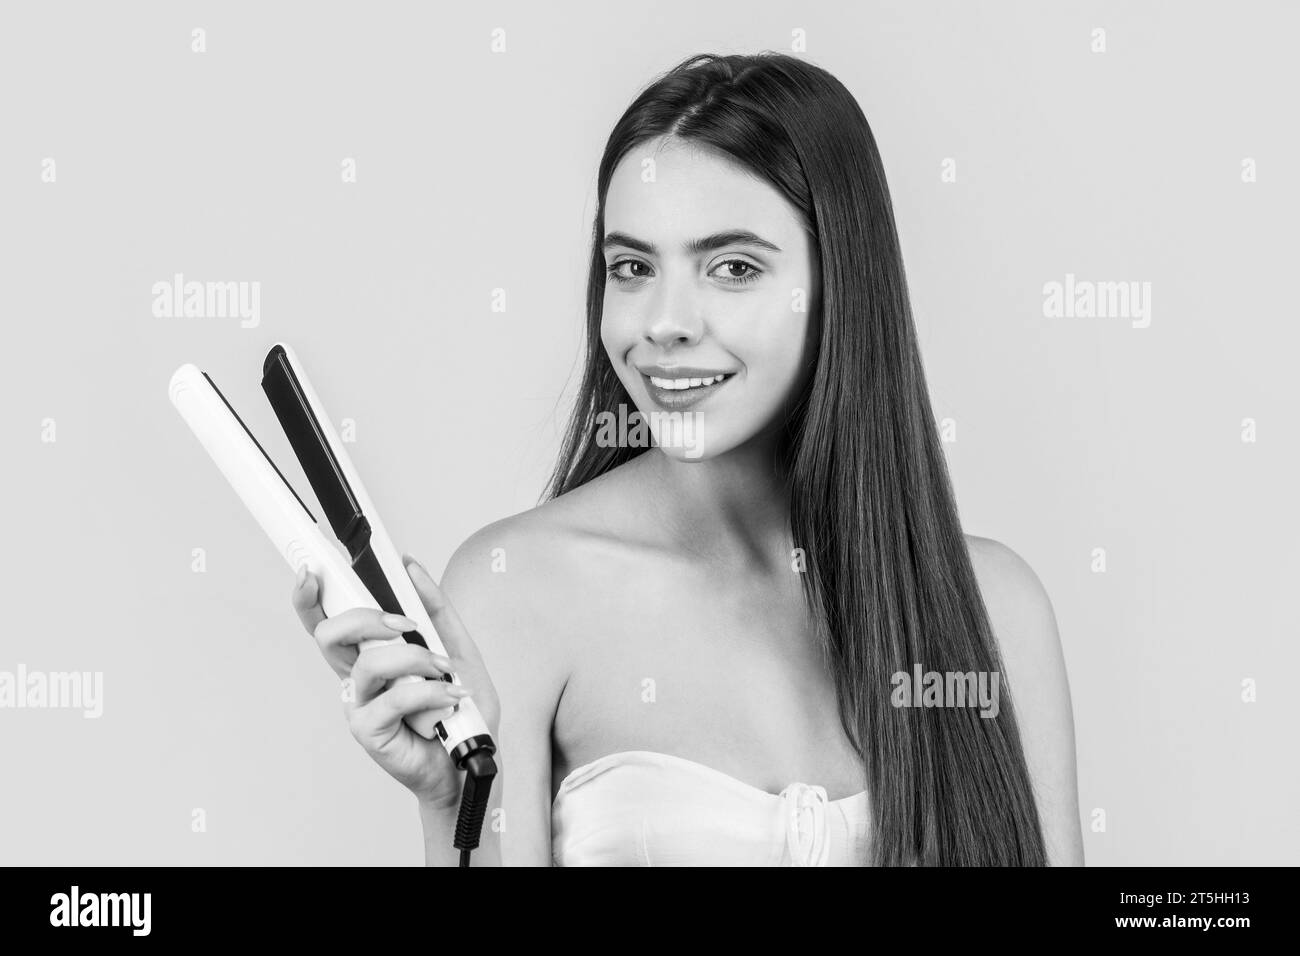 Hairstyle. Beautiful smiling woman ironing long hair with flat iron. Black and white Stock Photo